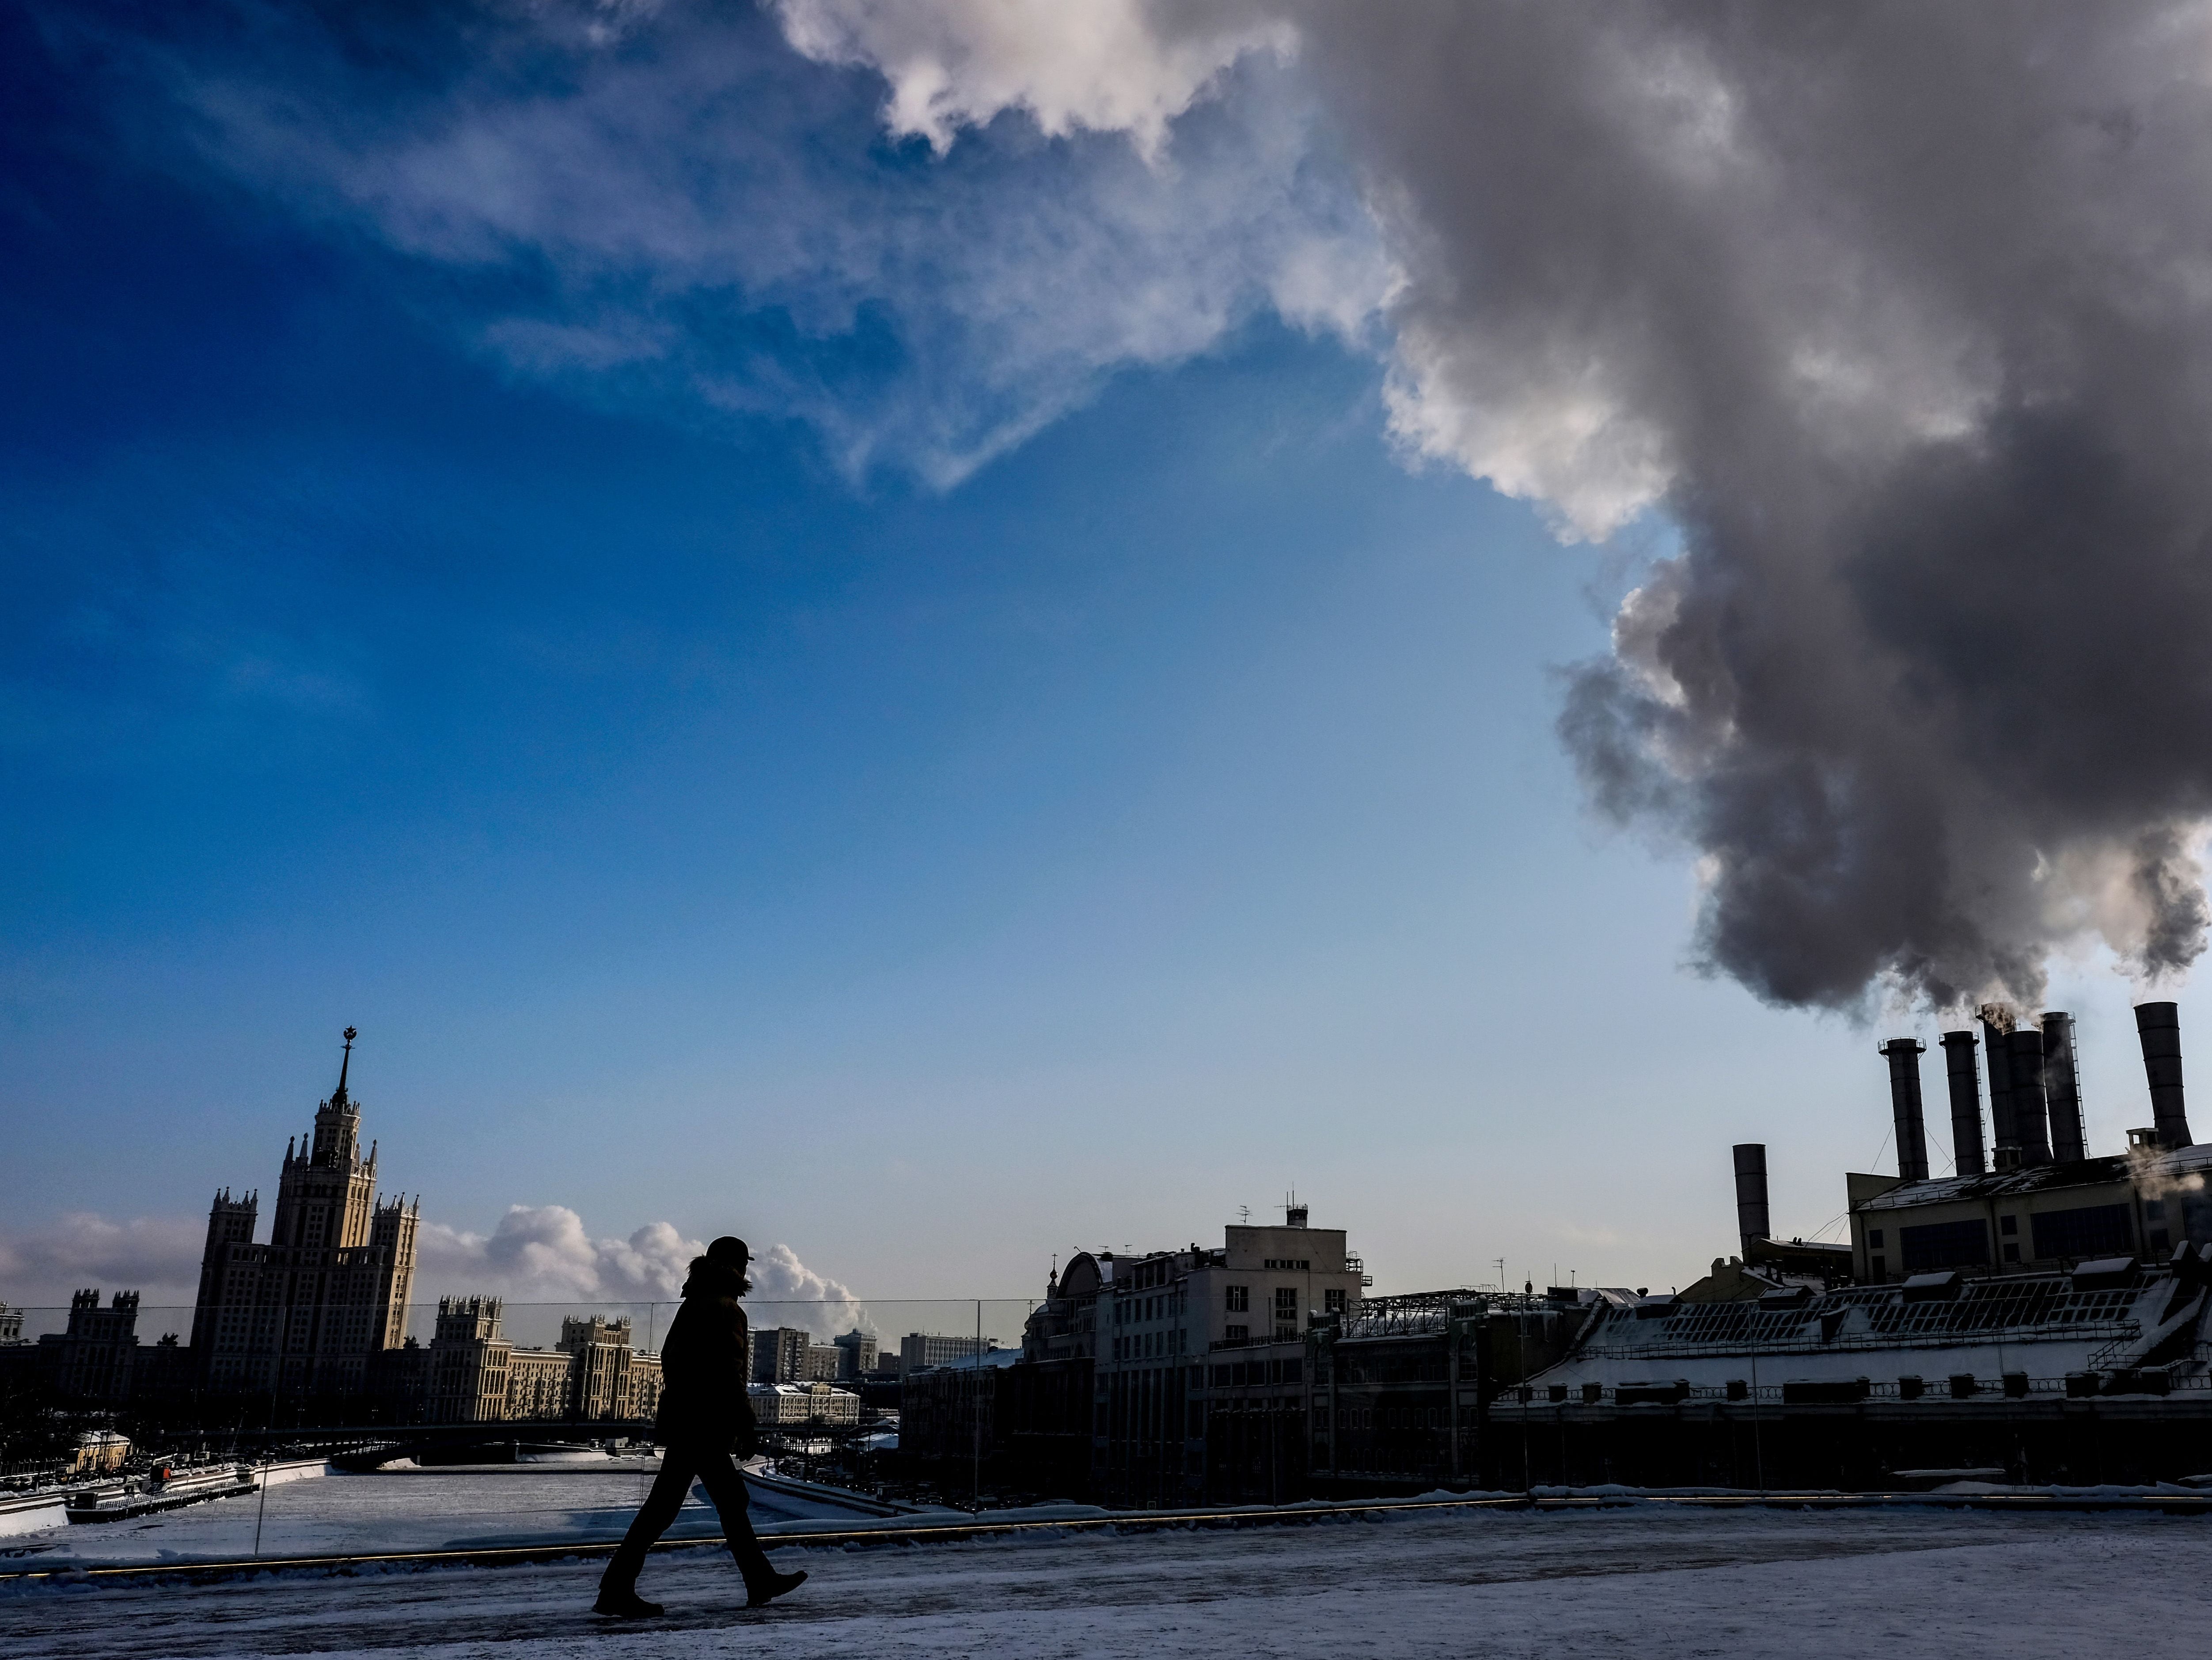 A man walks near the heat electropower station and Stalin’s tower building in Zaryadye park in central Moscow